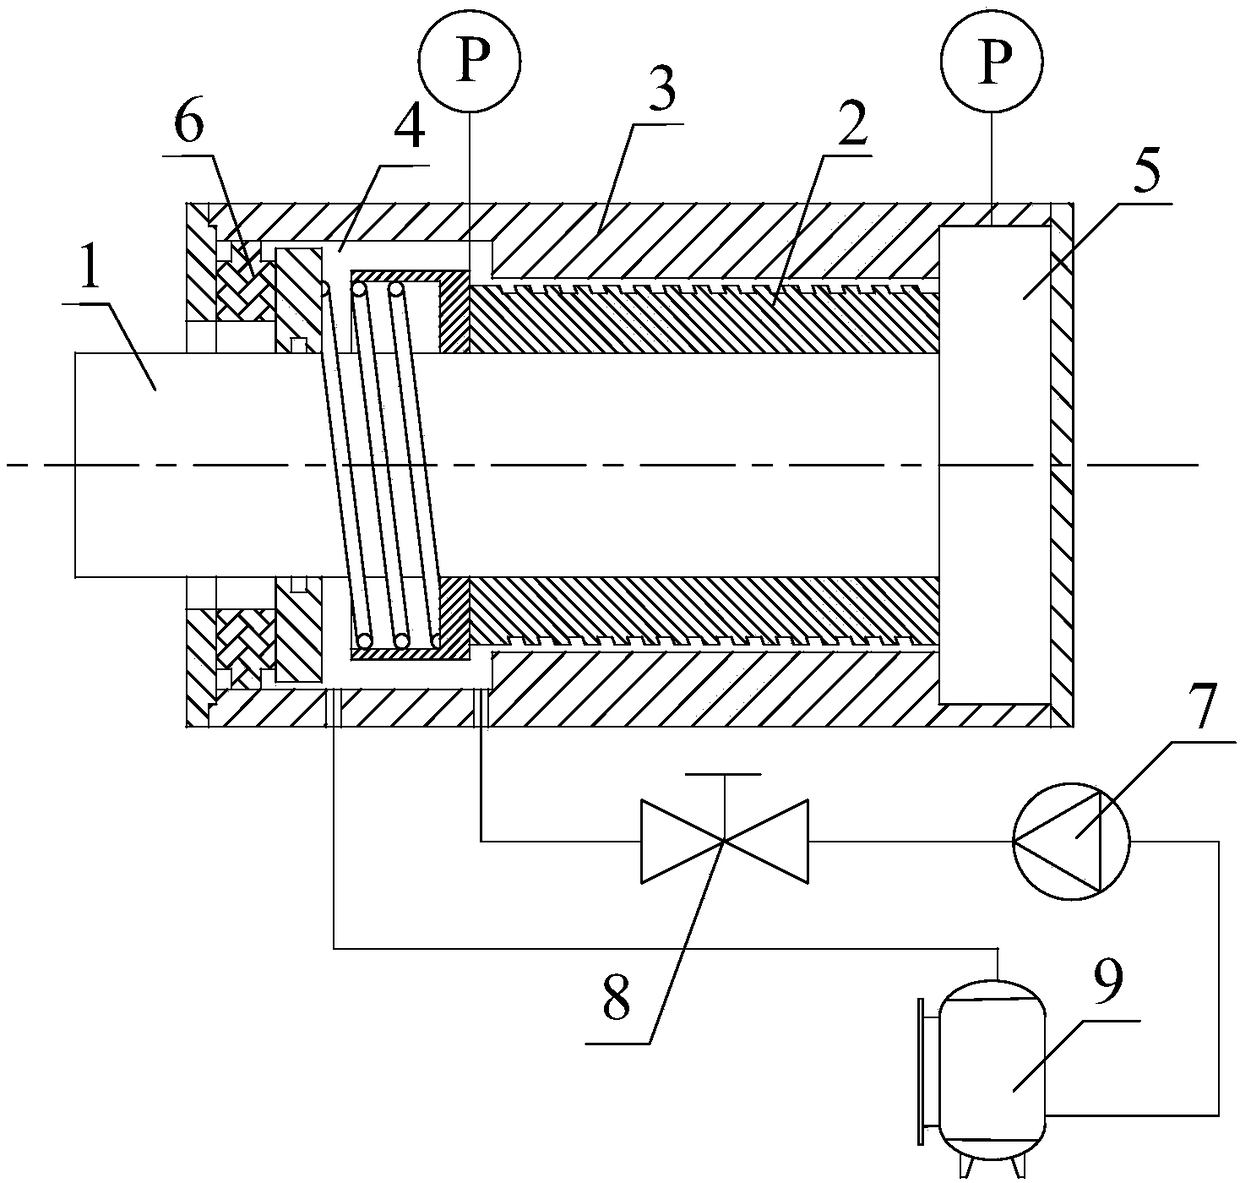 Turbine shaft-end seal device applied to Kalina power circulating system